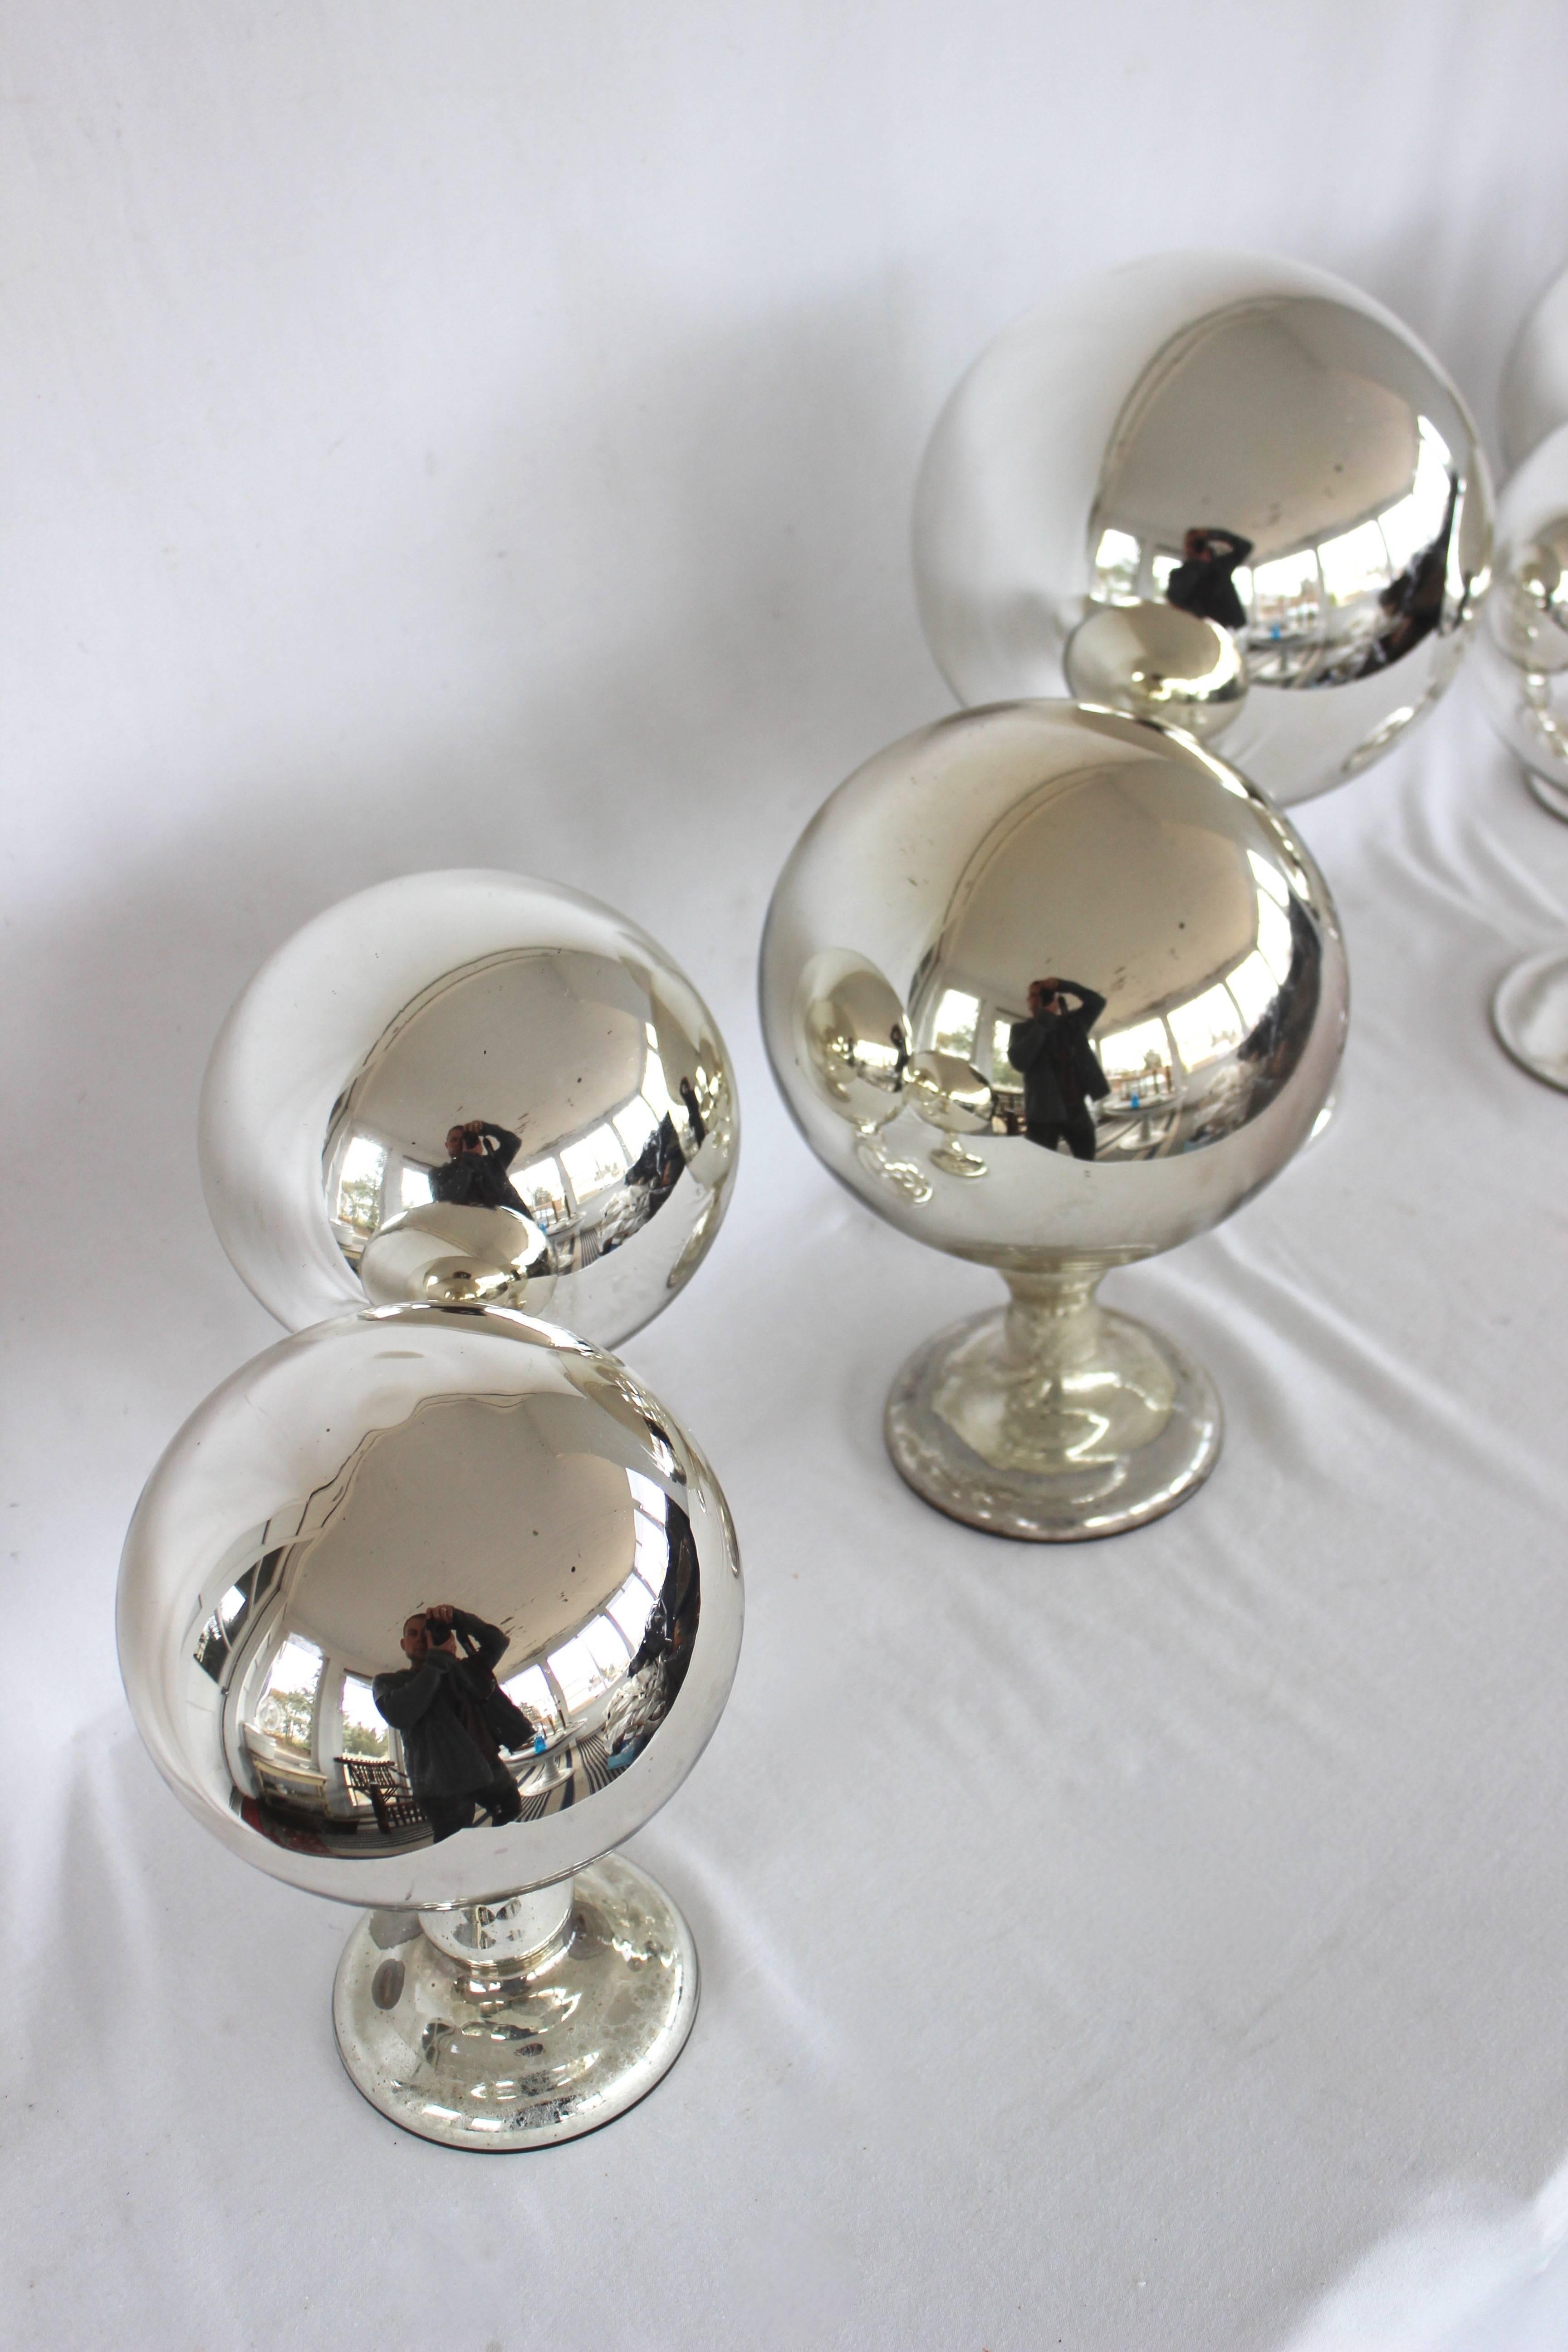 Collection of Mercury Glass Spheres......antique hat stands.....

1 Large - 13.5